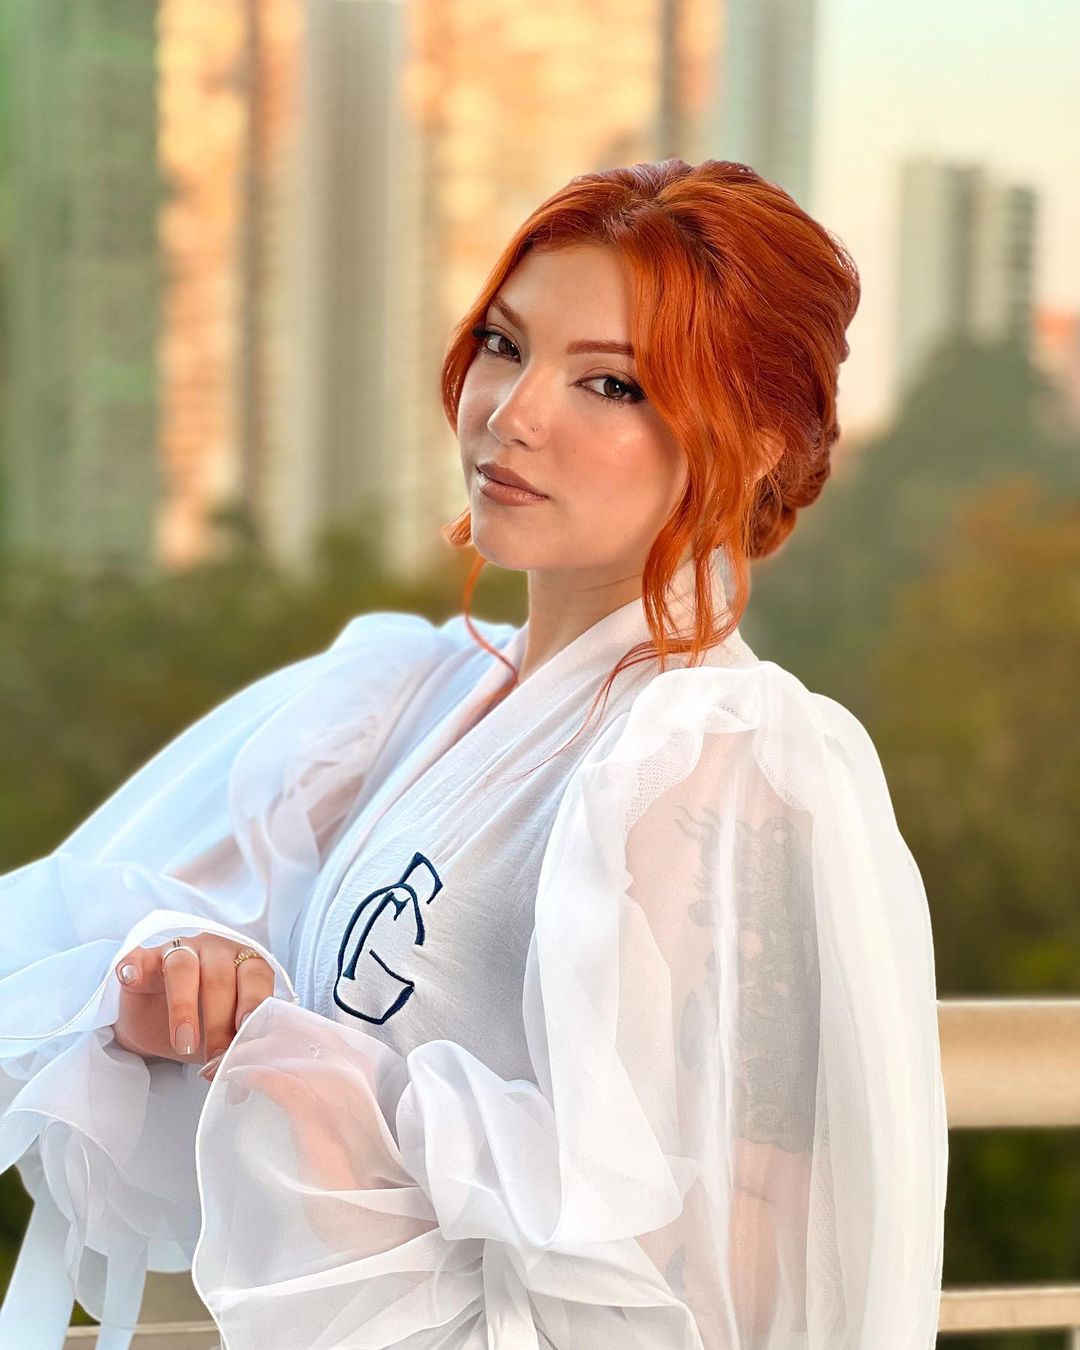 A confident individual with vibrant red hair posing in a breezy white robe